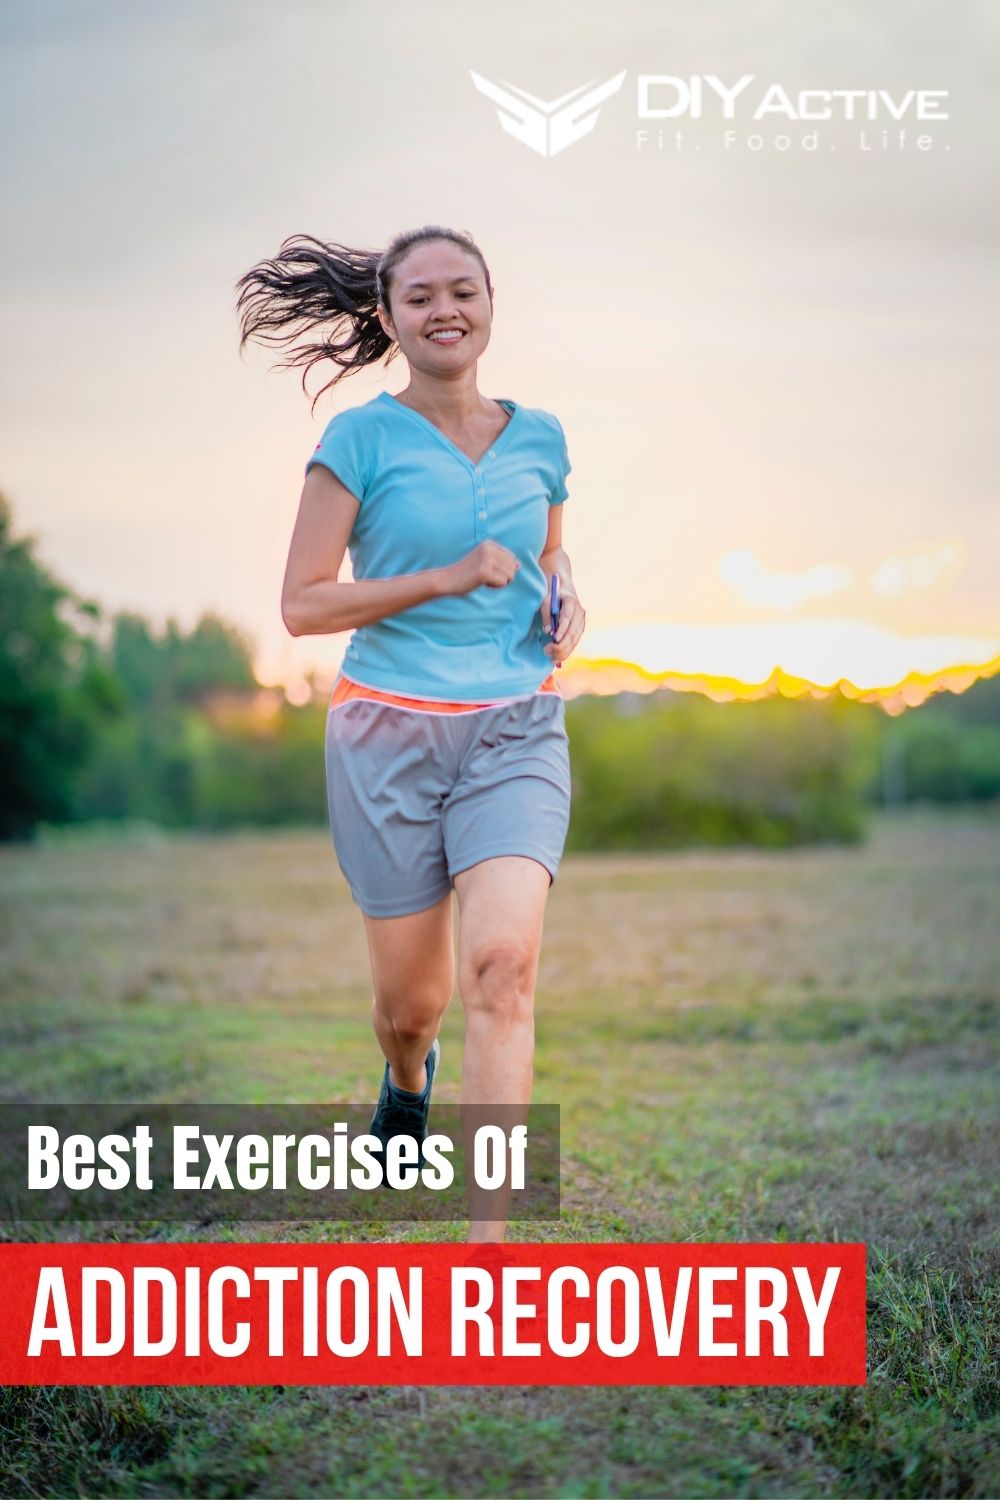 7 Best Exercises Of Addiction Recovery 2